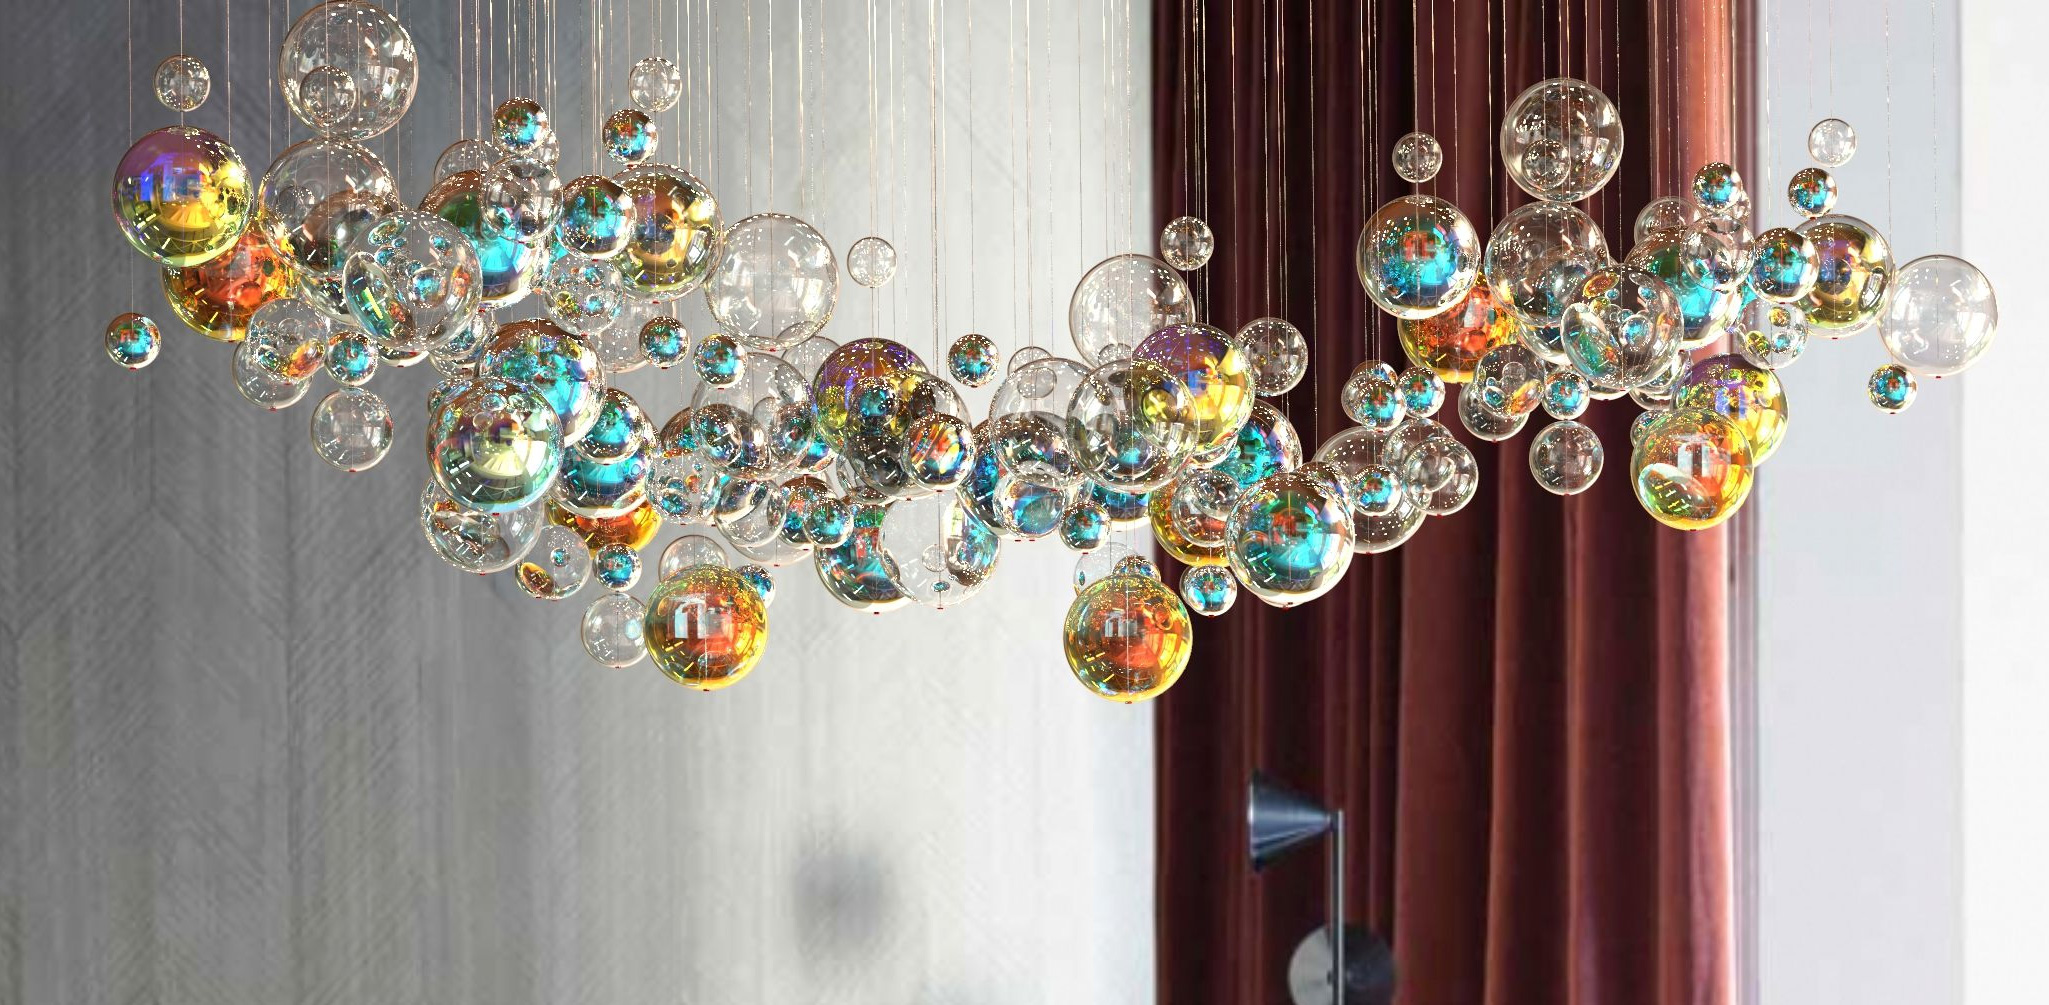 Bubbles chandlier from glass hanging in interior